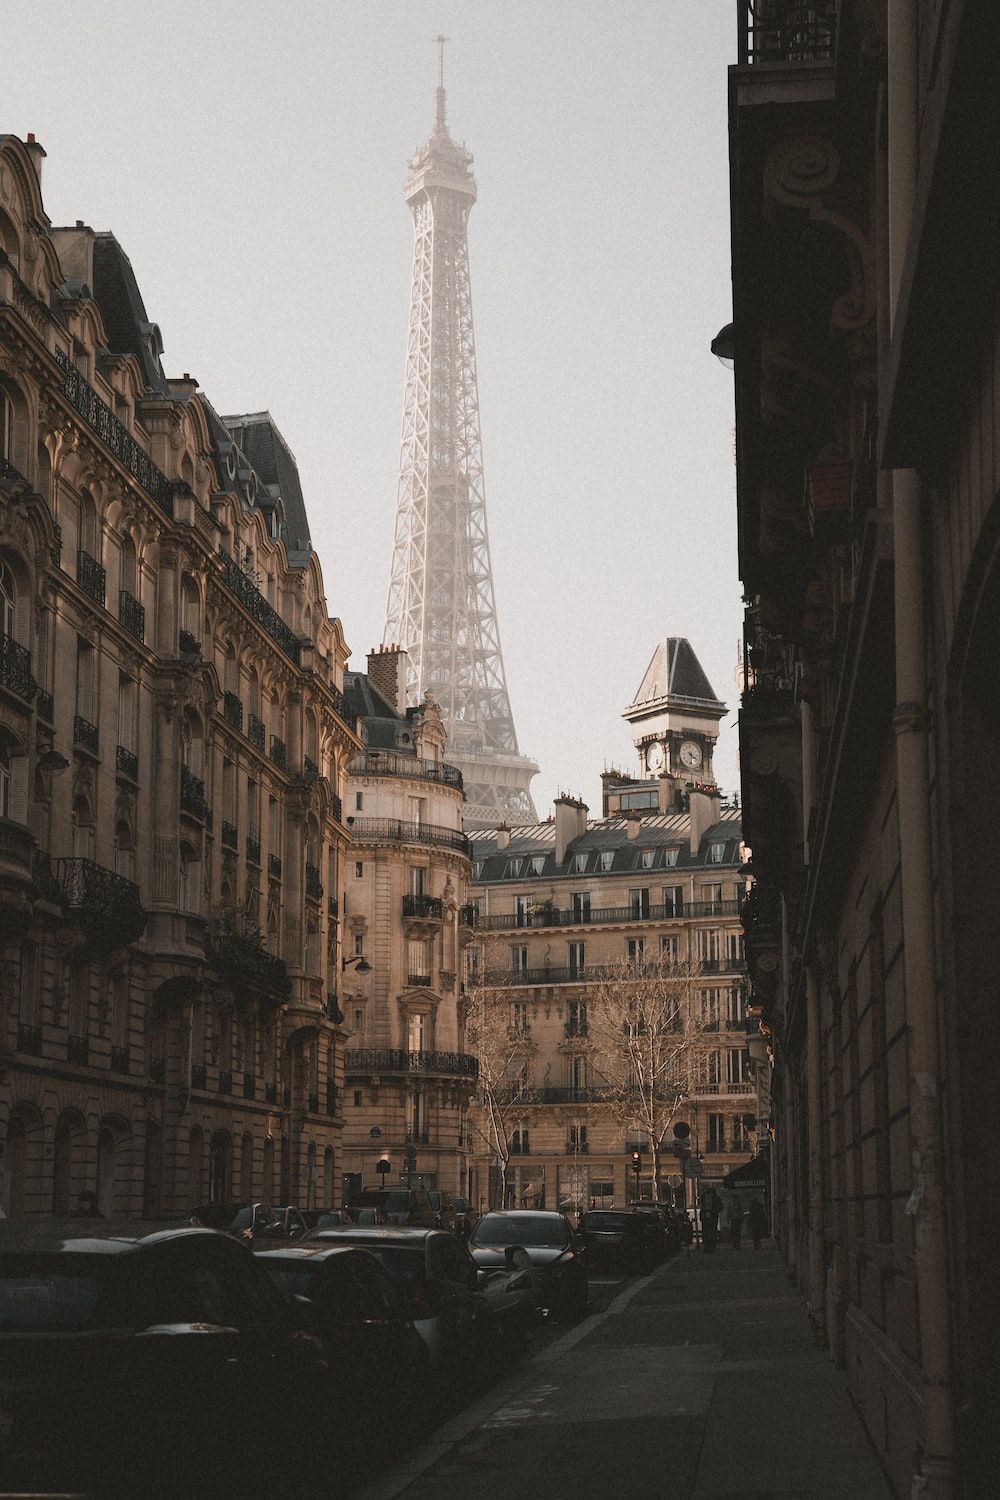 The eiffel tower towering over the city of paris photo